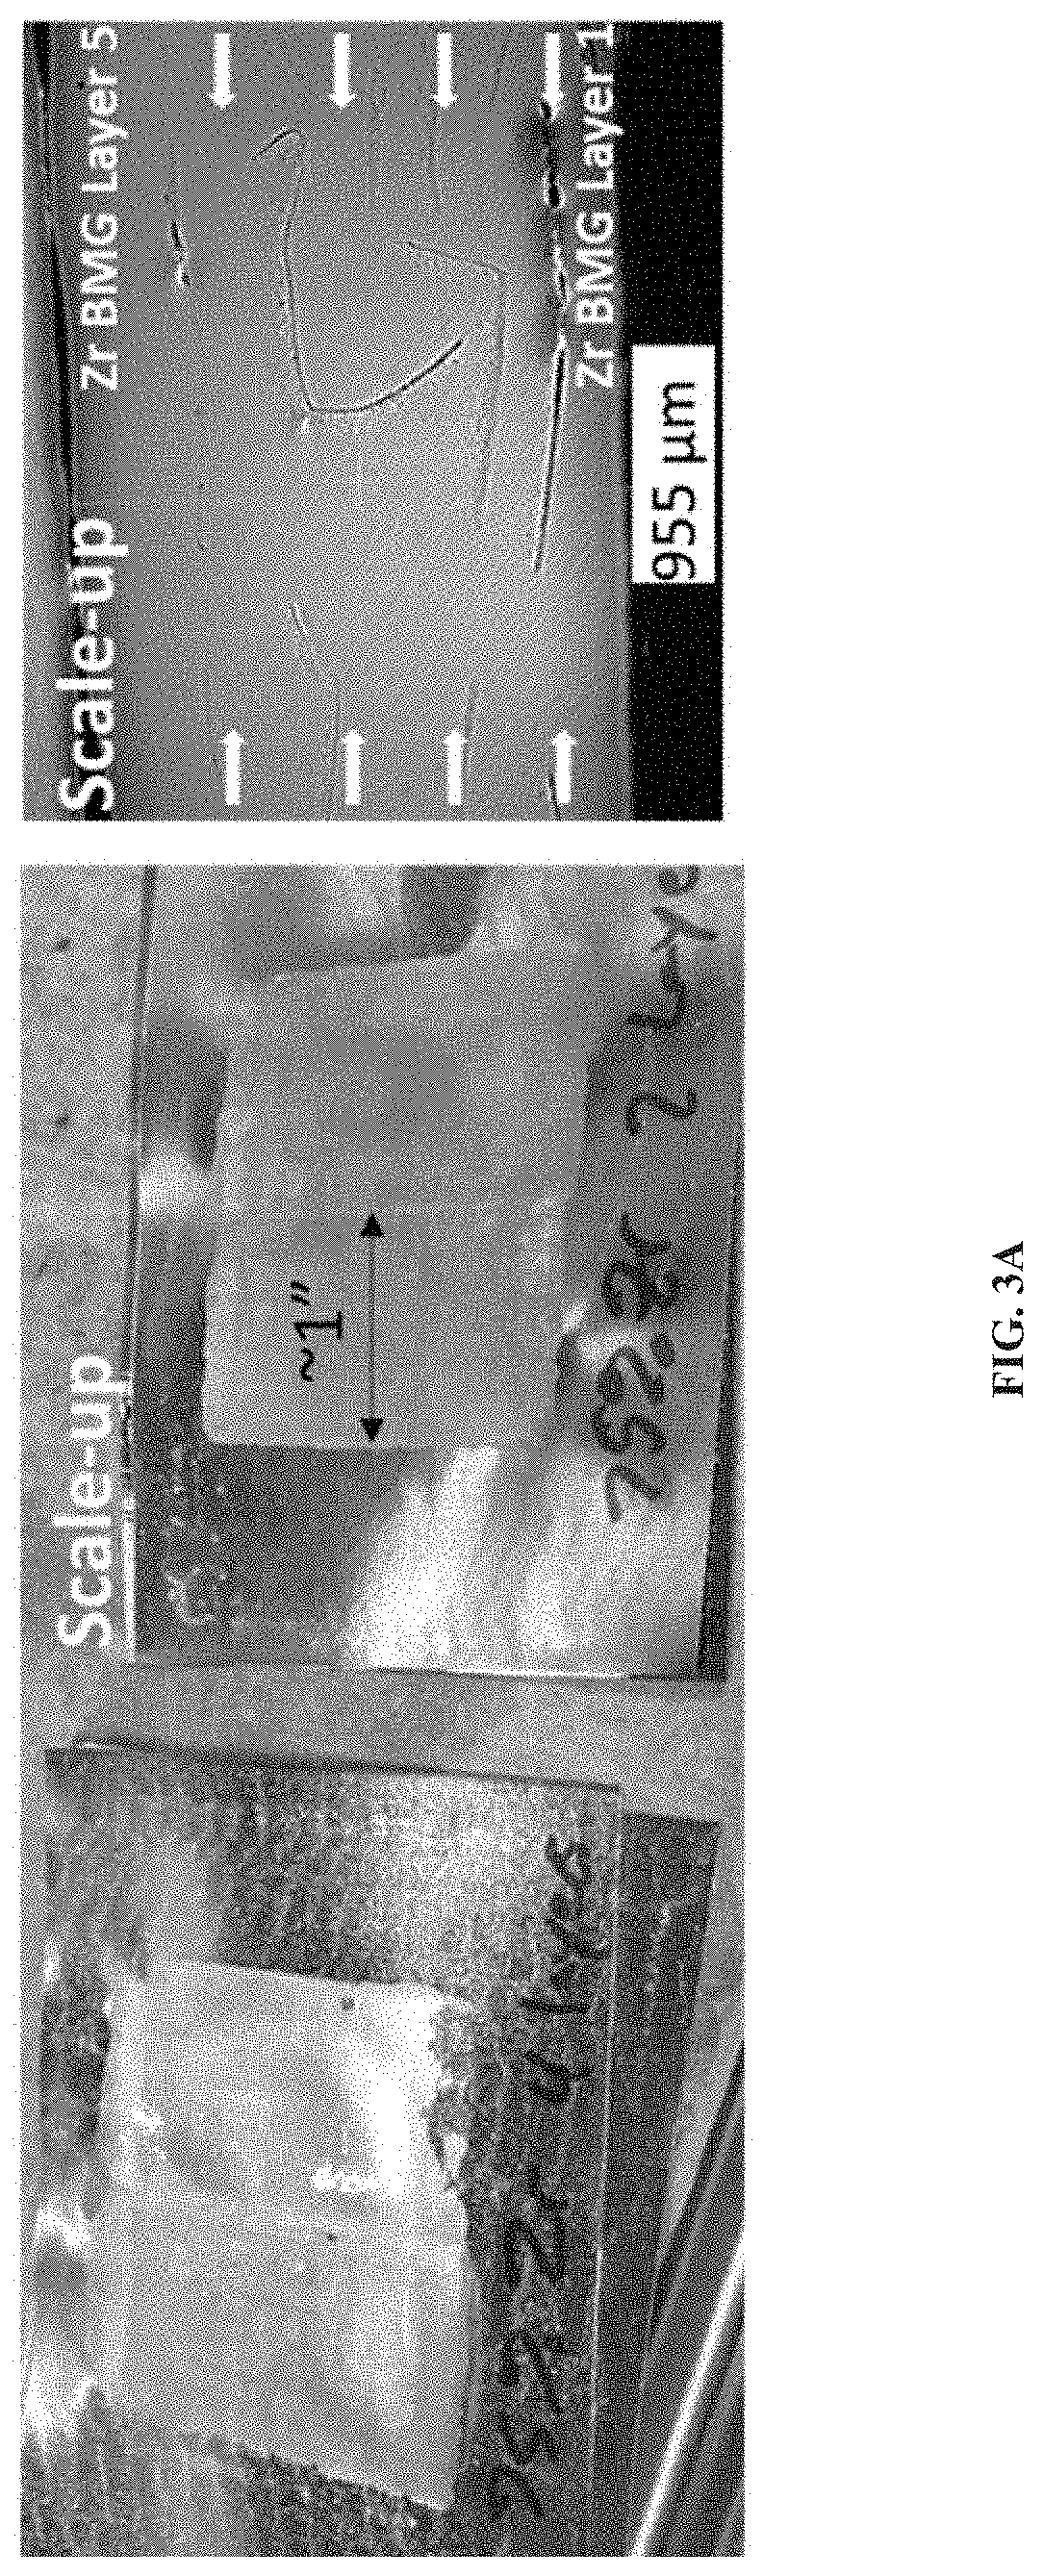 Ultrasonic additive manufacturing of cladded amorphous metal products